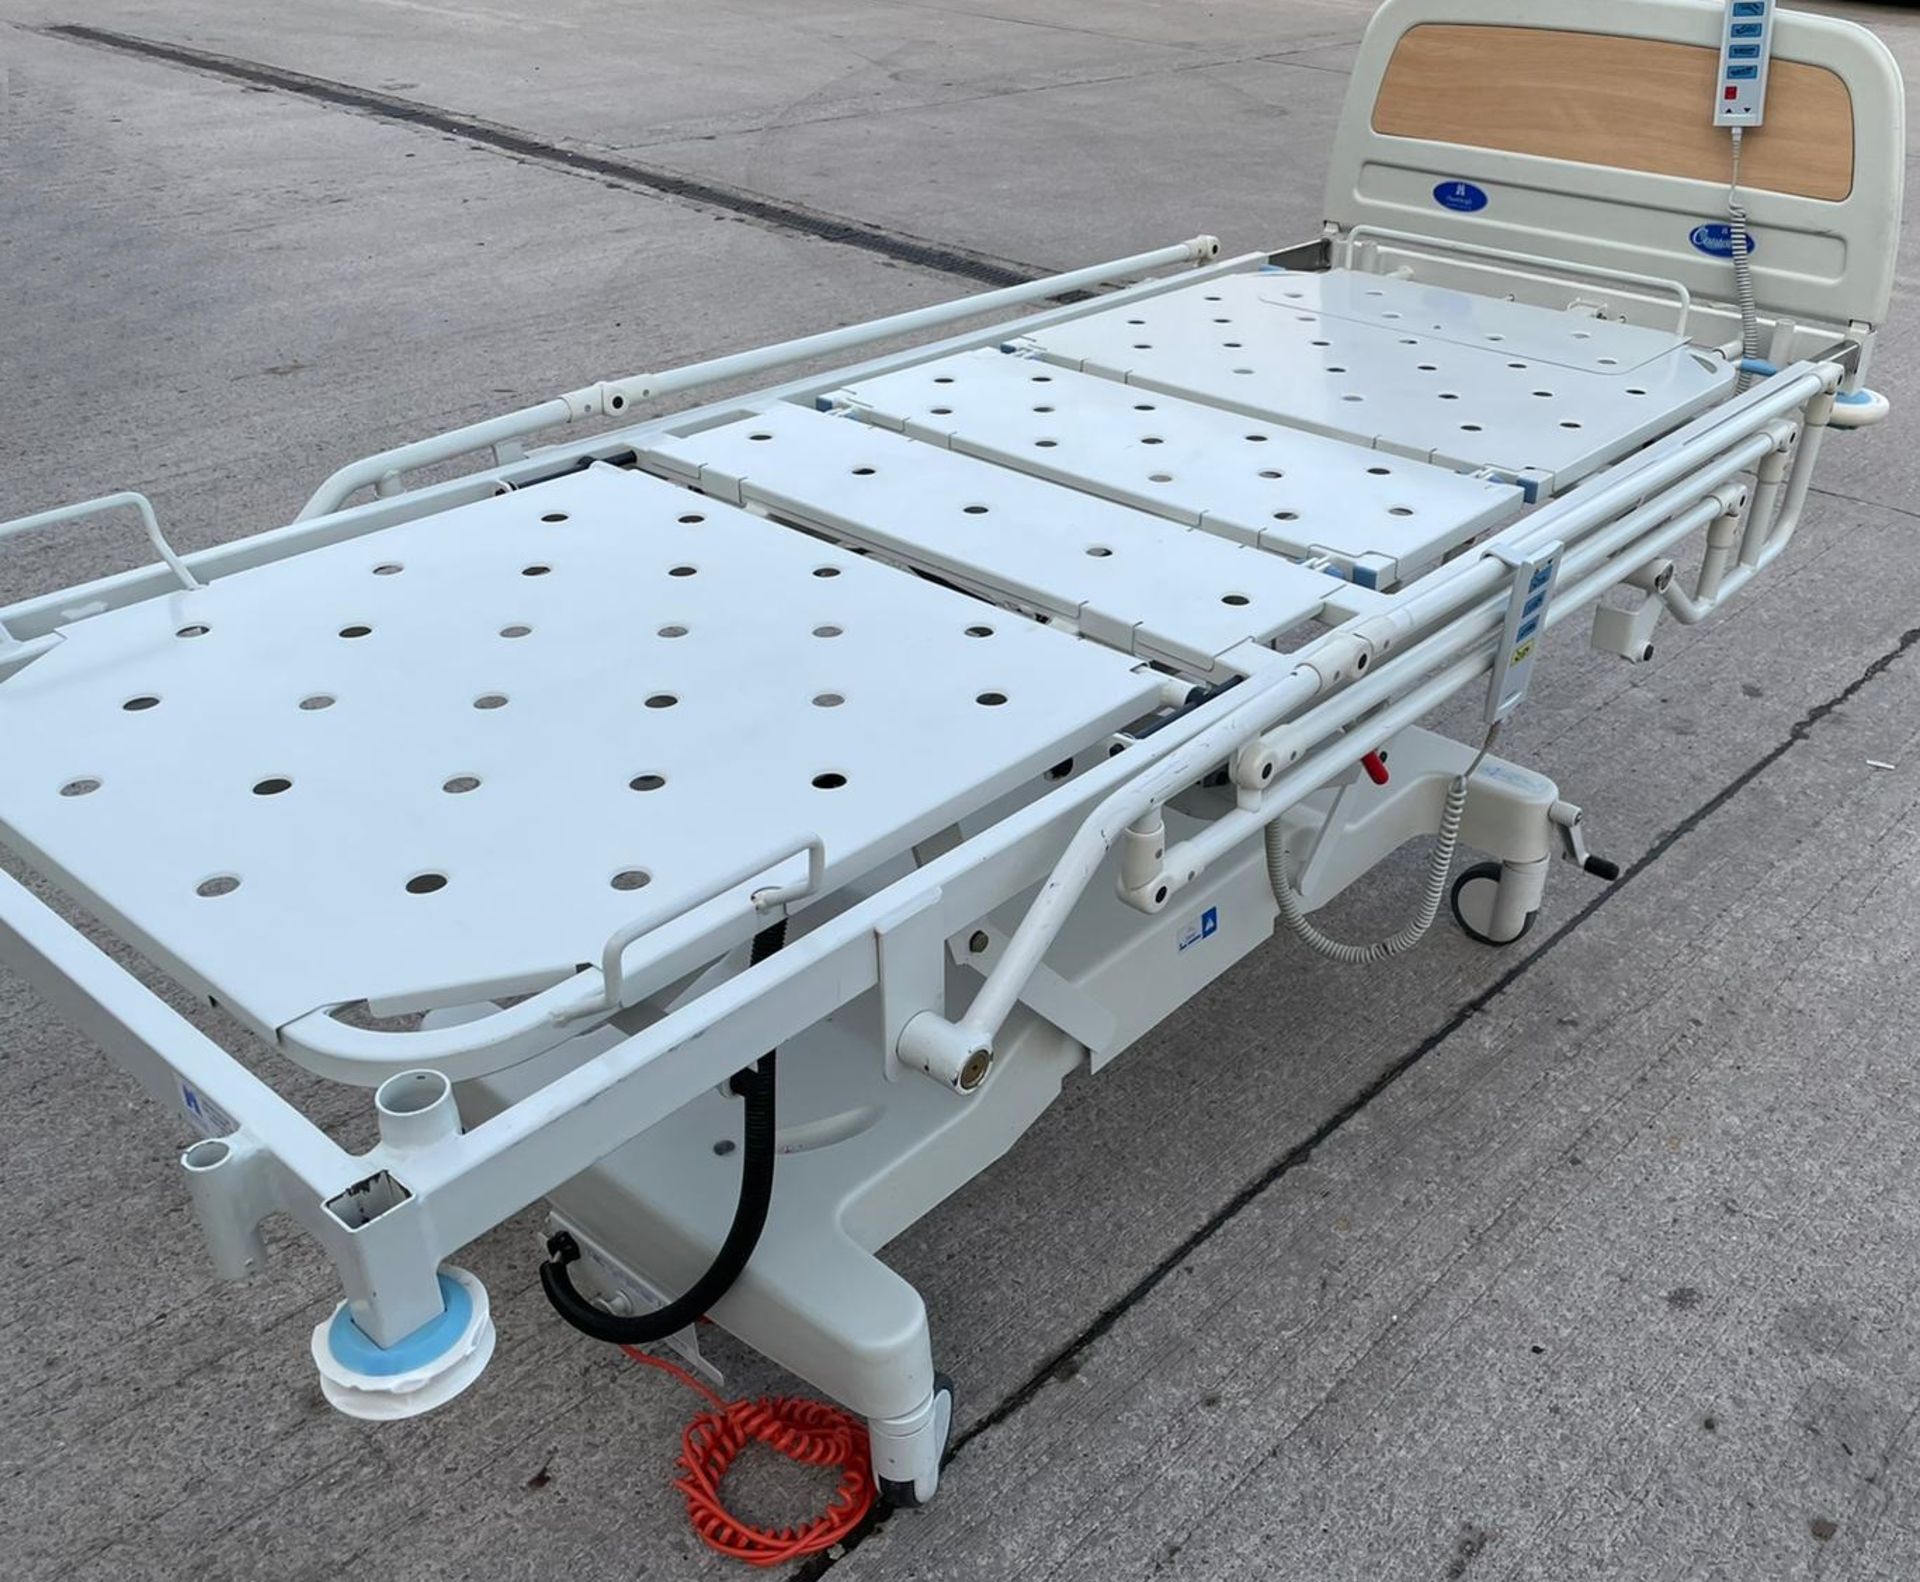 1 x Huntleigh CONTOURA Electric Hospital Bed - Features Rise/Fall 3-Way Profiling, Side Rails, - Image 3 of 11